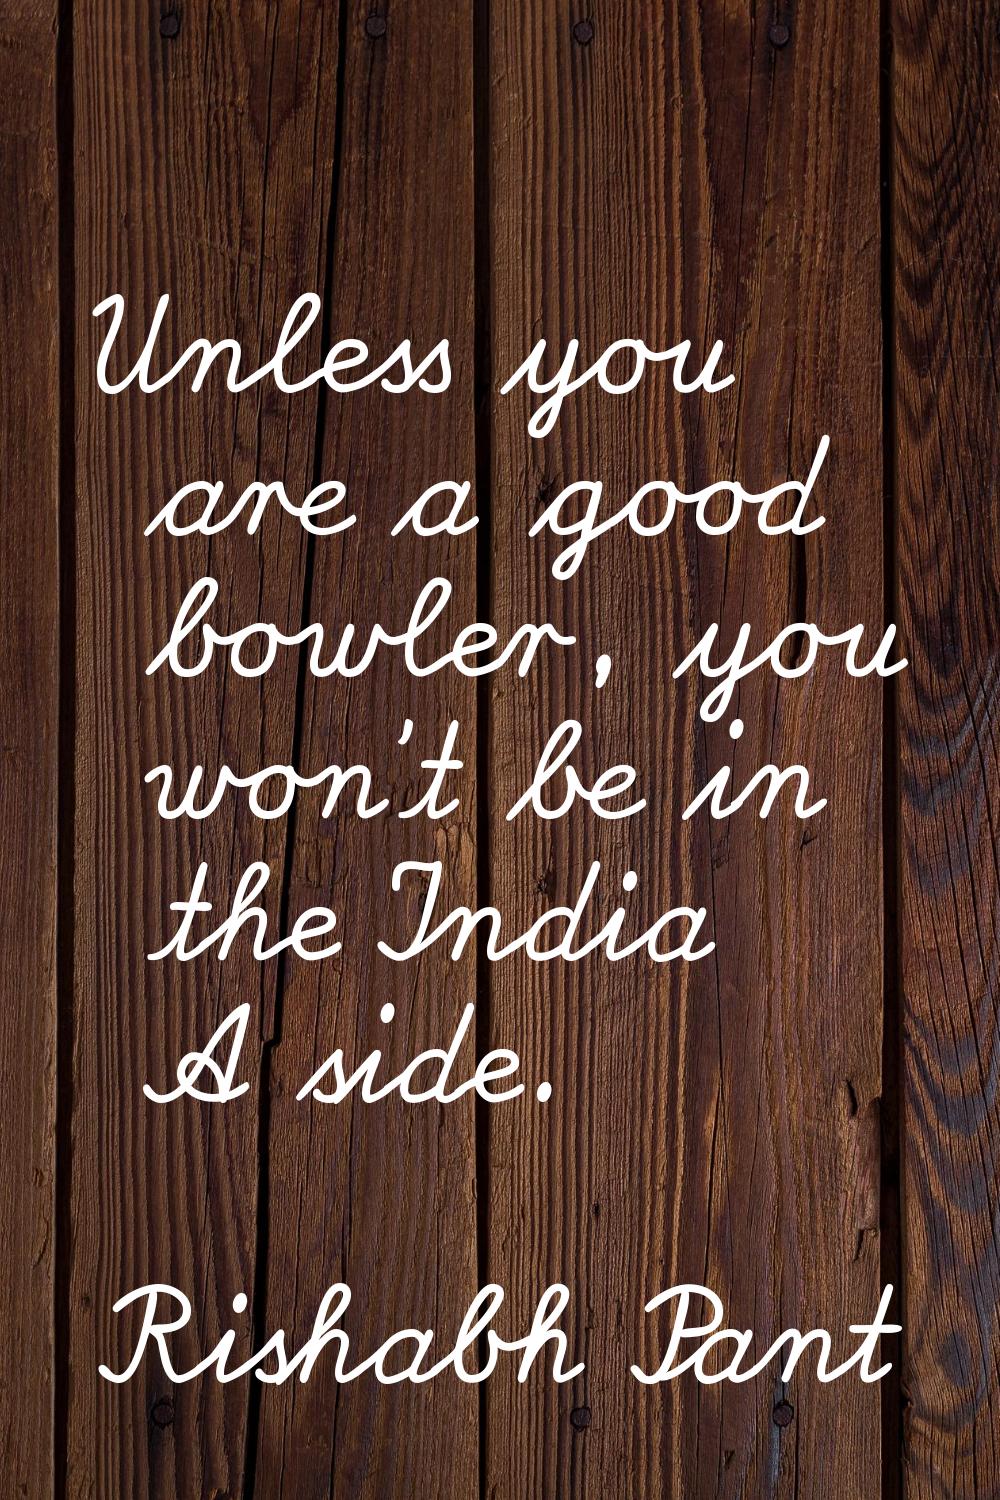 Unless you are a good bowler, you won't be in the India A side.